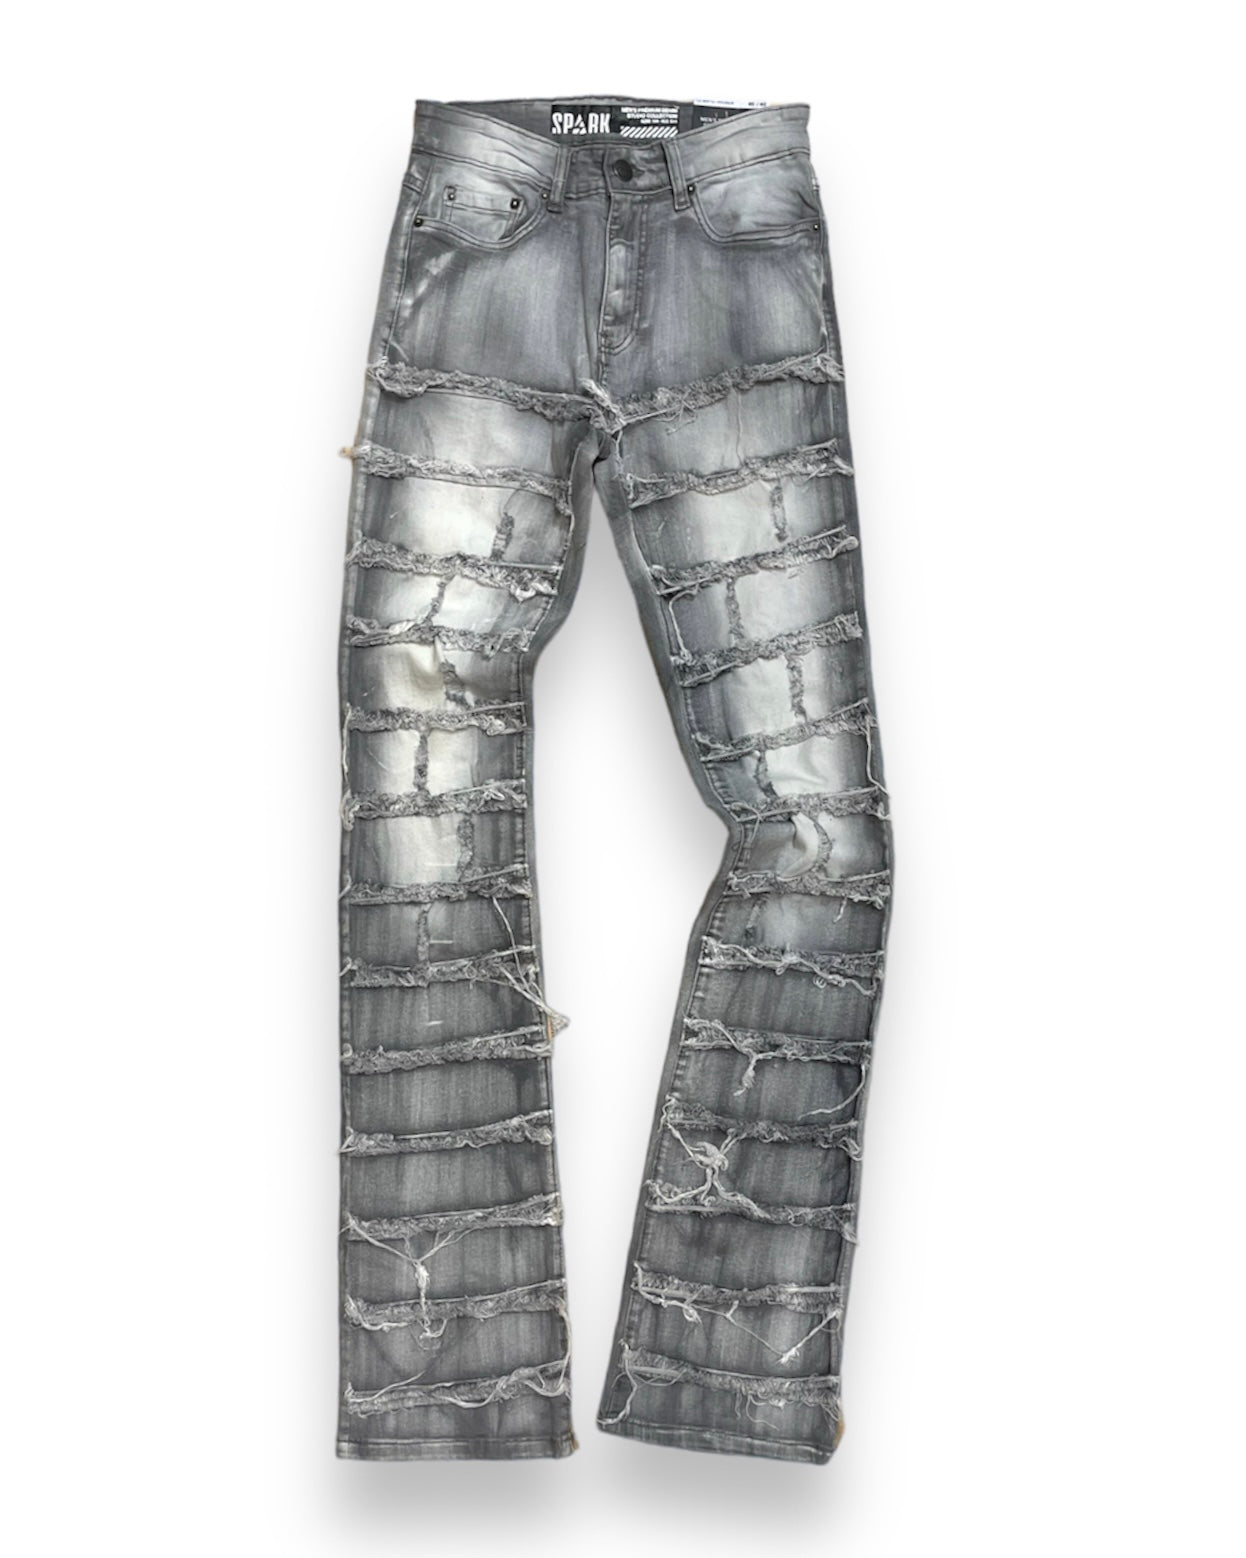 Stacked Jeans from Spark